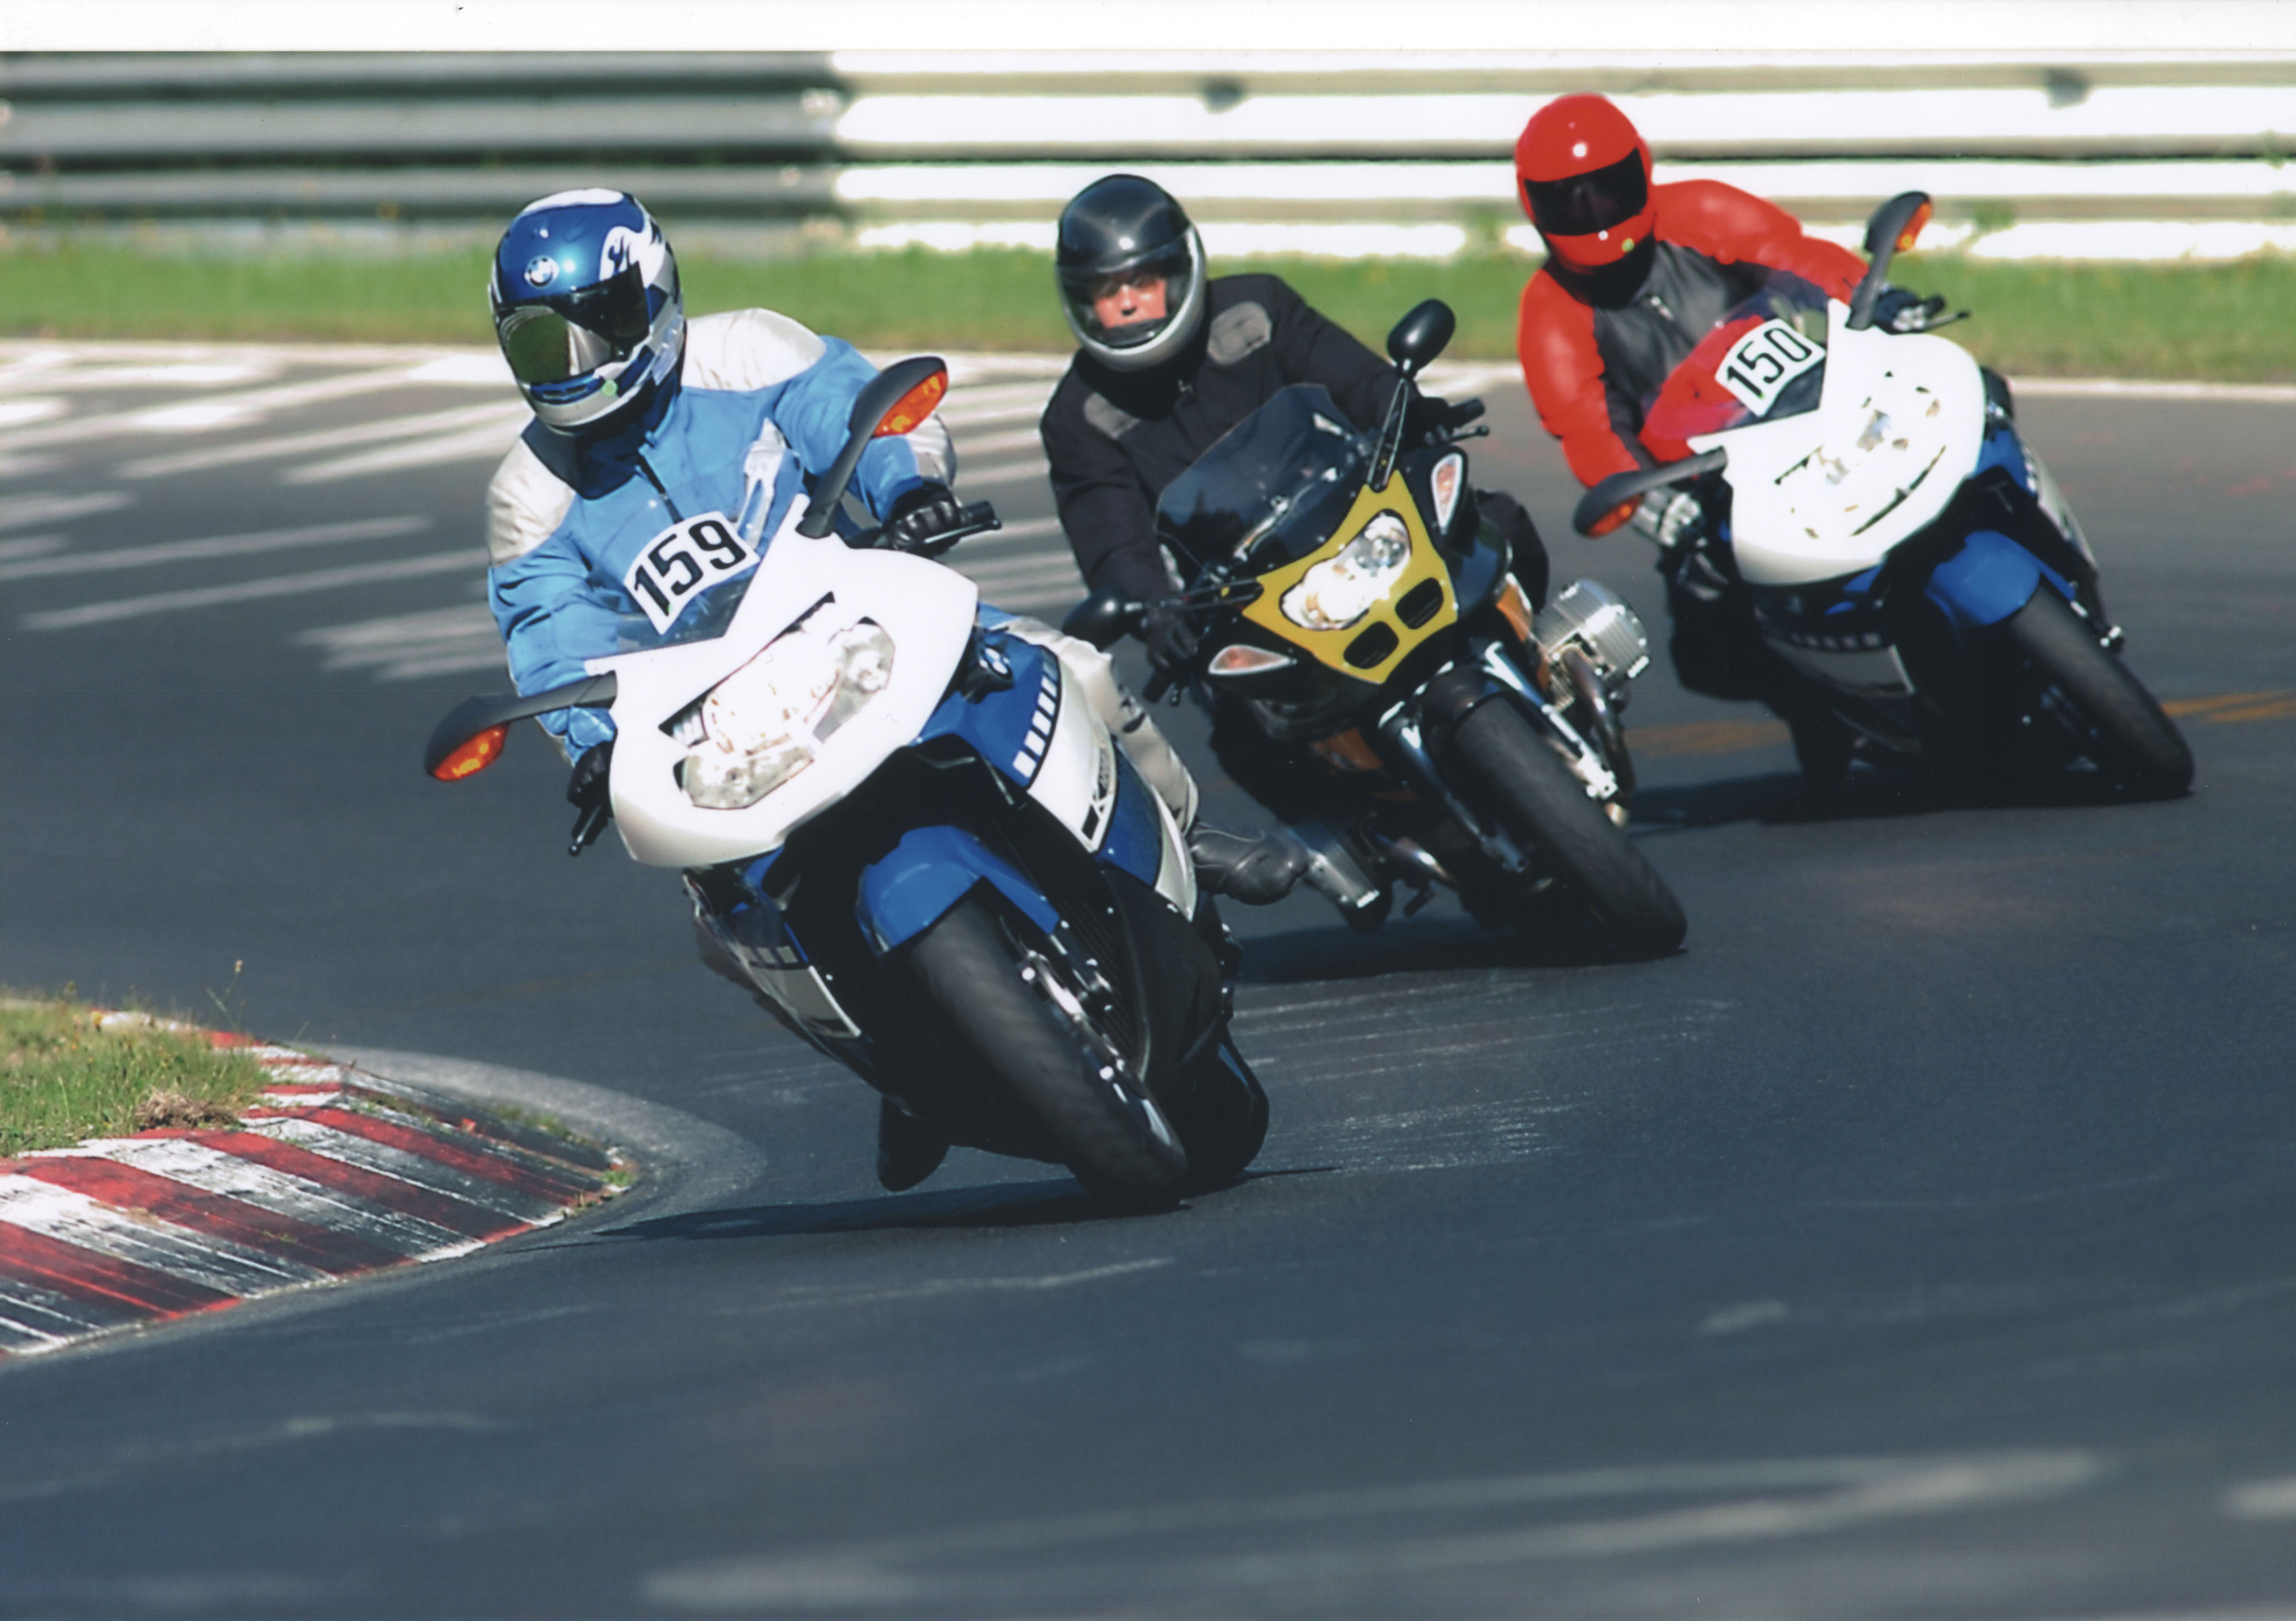 Test Riding the (168mph) K1200S on the Nurburgring